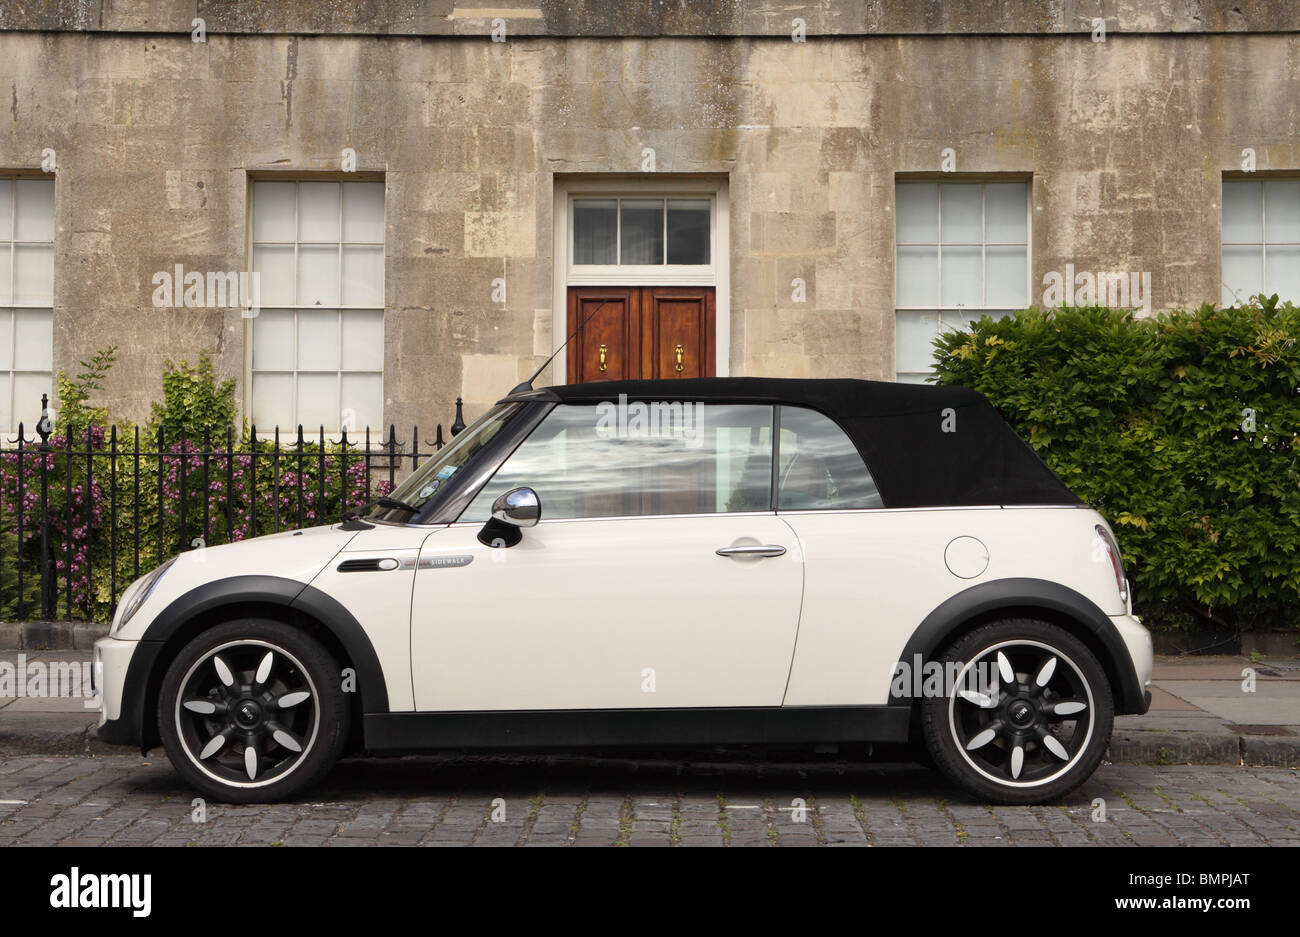 BMW Mini One Sidewalk soft top cabriolet car parked in the Royal Crescent Bath England Stock Photo